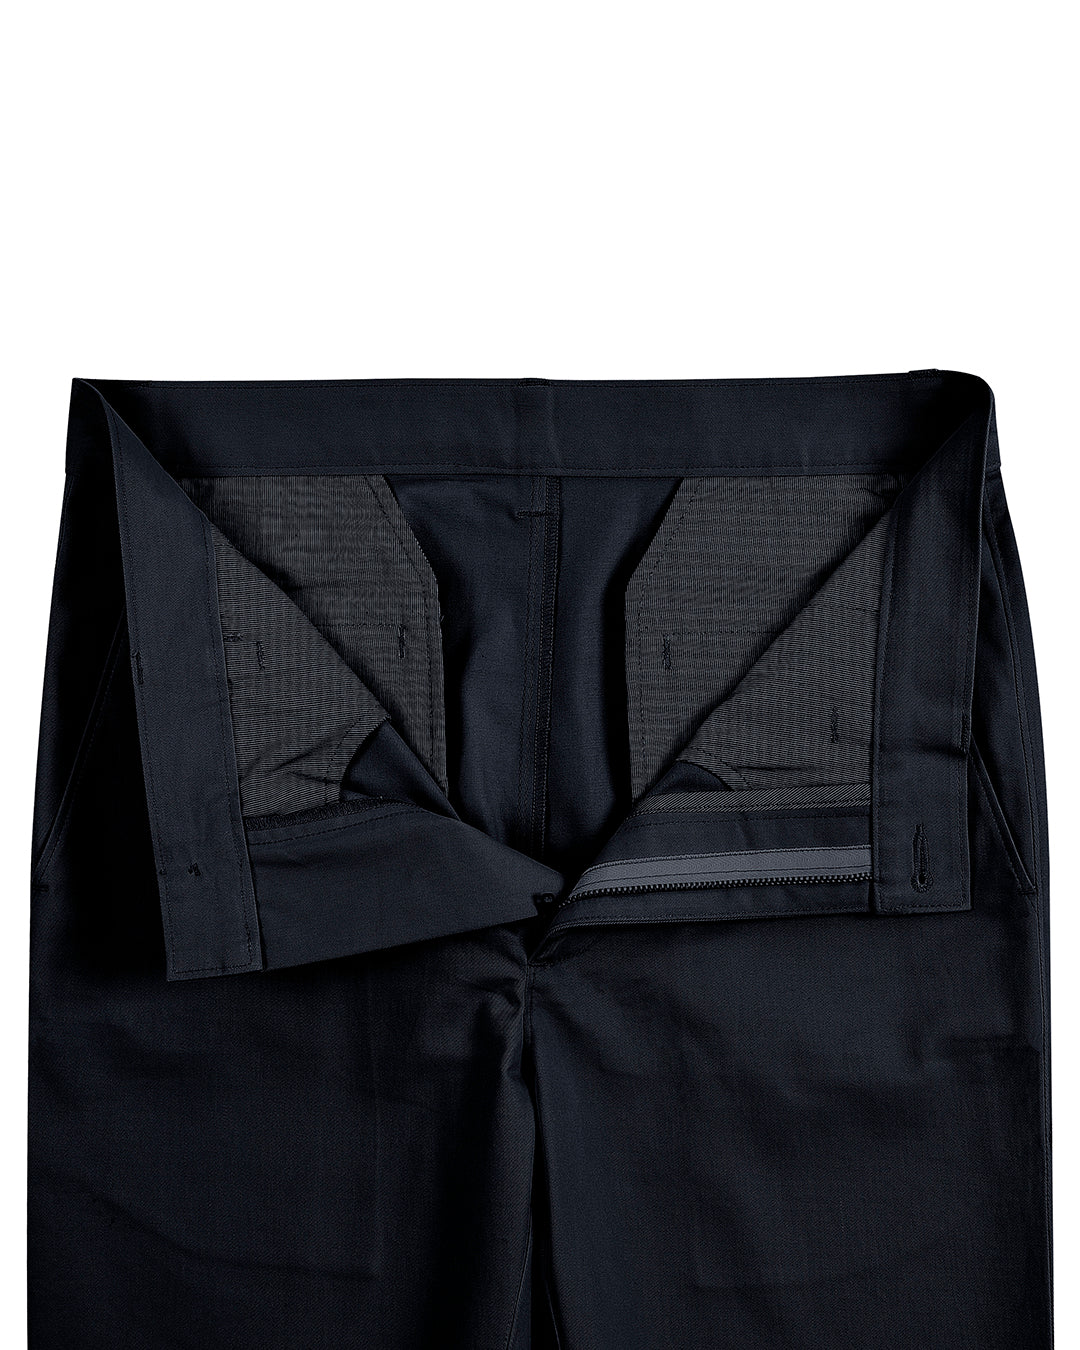 Front open view of custom Genoa Chino pants for men by Luxire in navy